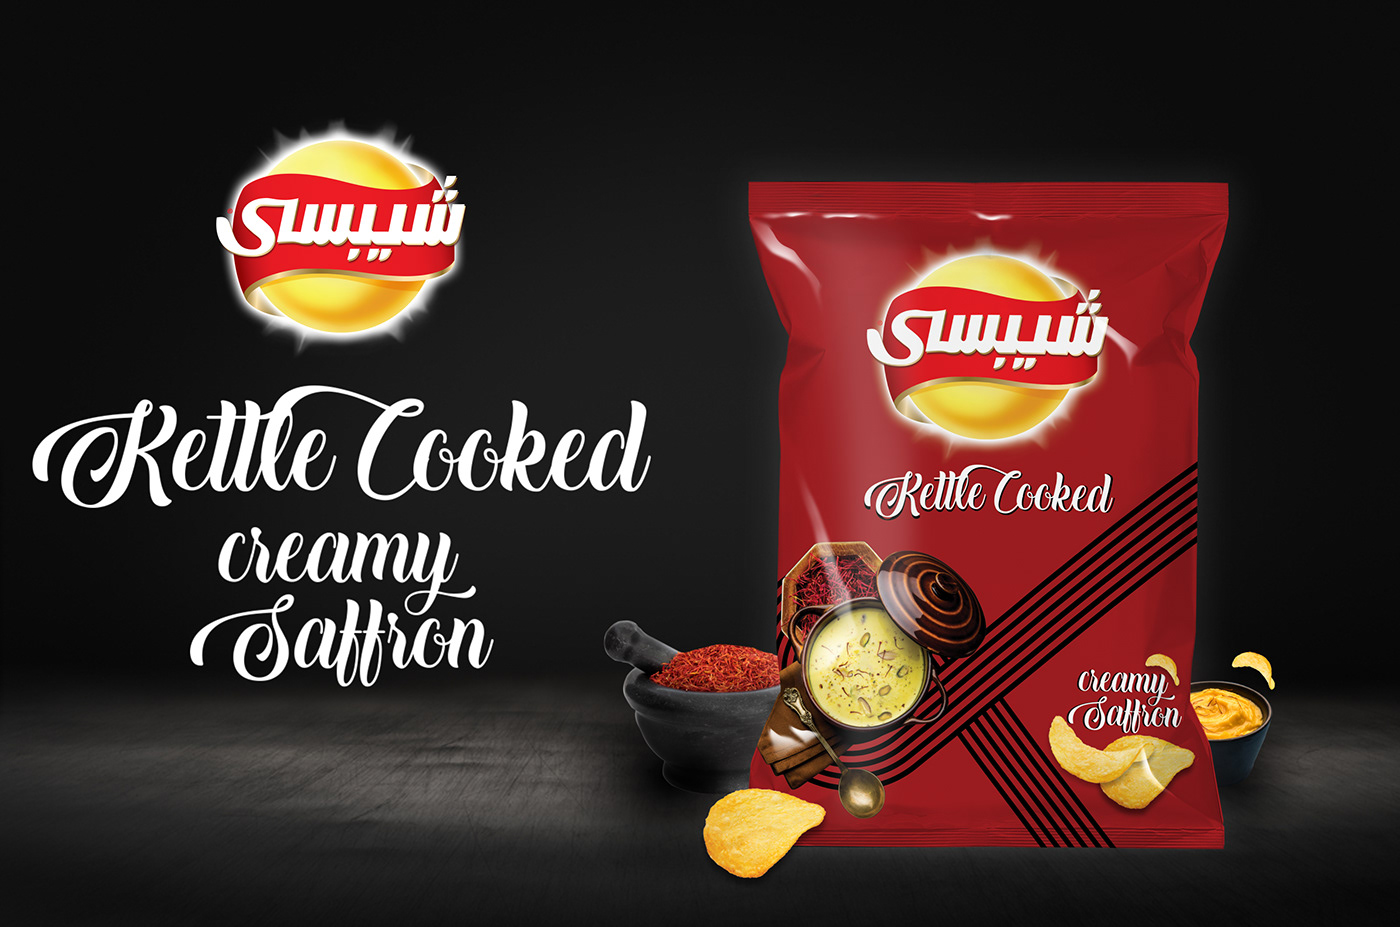 Packaging package chips identity Display packaging design brand identity snack packaging Food  potato chips